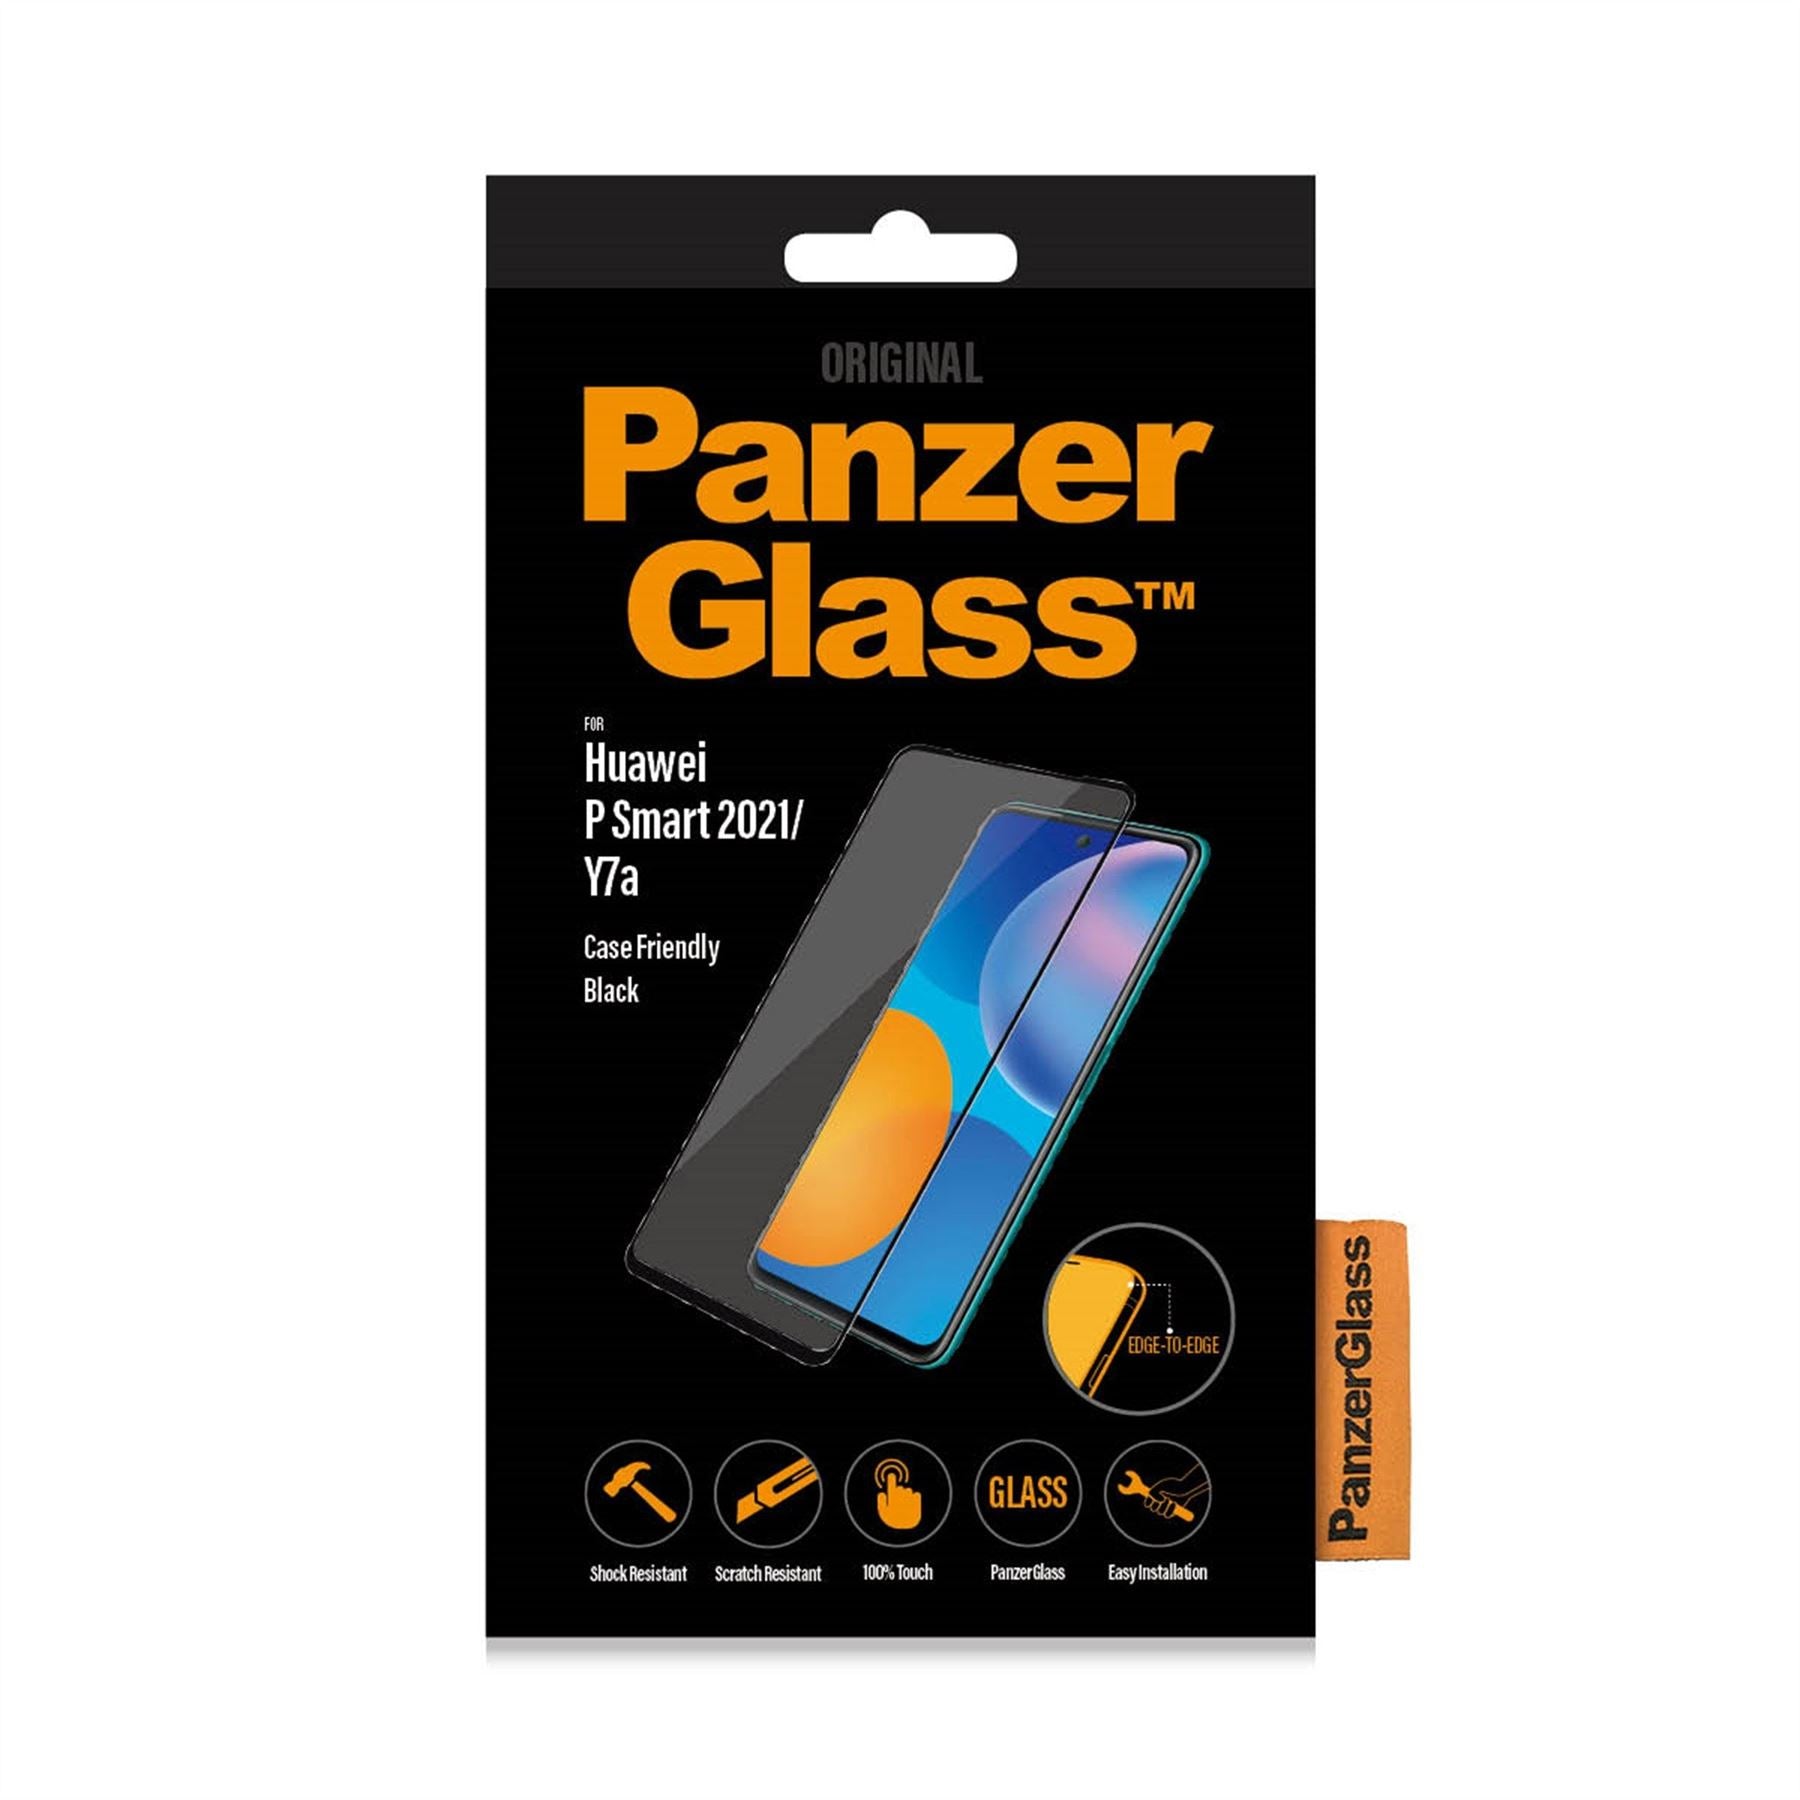 Official  Panzer Glass Black for Huawei P Smart 2021 - PZ5384